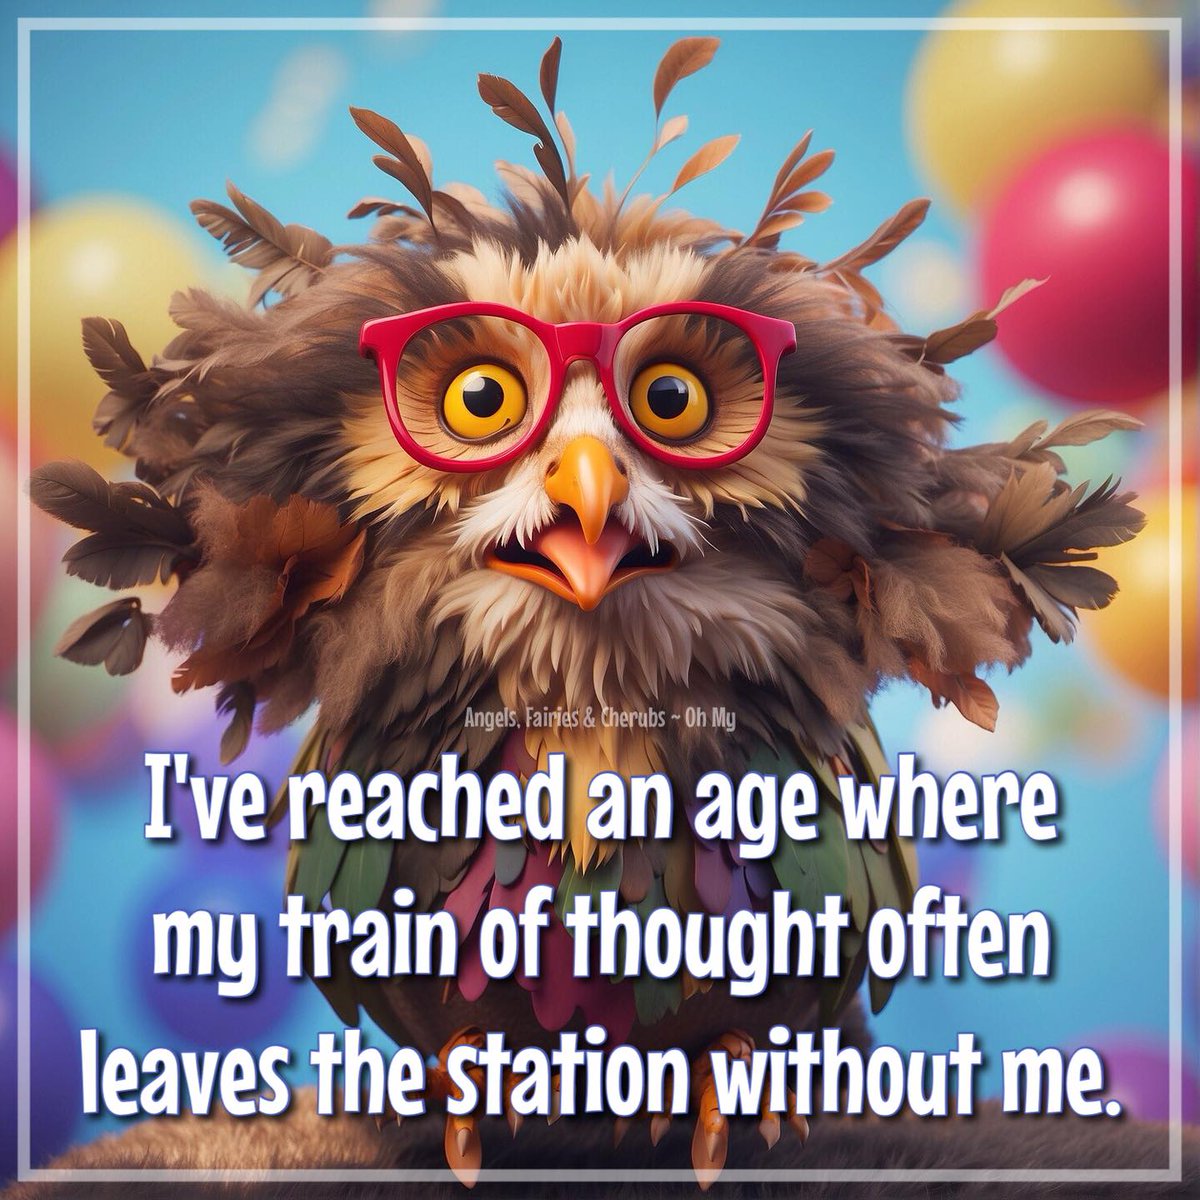 I've reached an age where my train of thought often leaves the station without me. ~ Many members of this club!